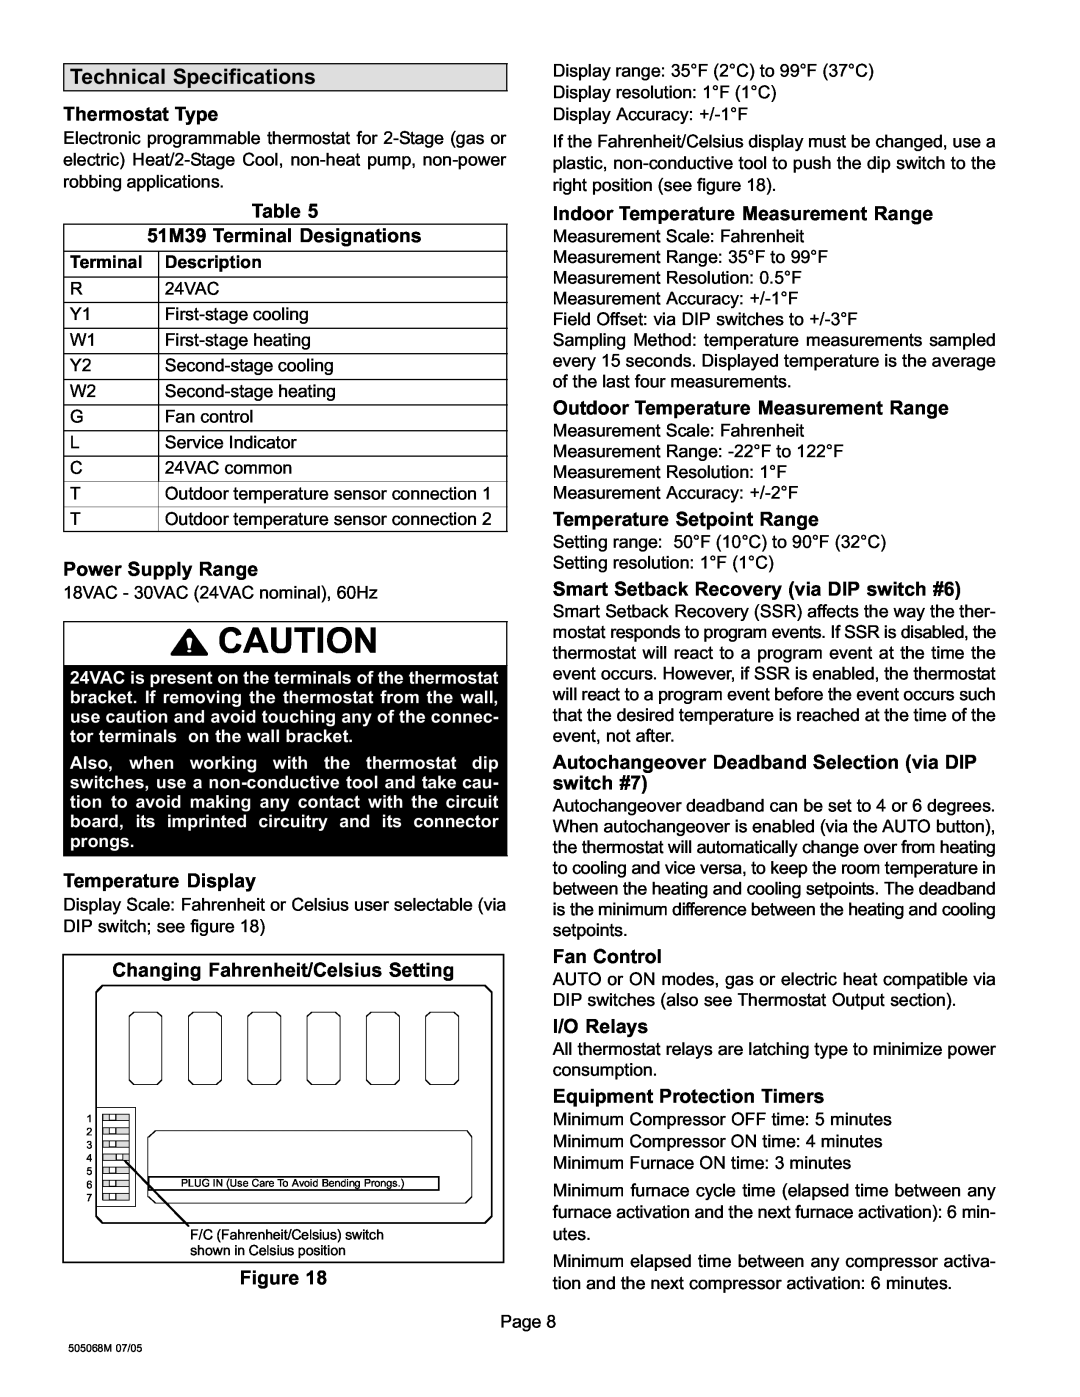 Lennox International Inc 51M37 operation manual Technical Specifications, Thermostat Type 